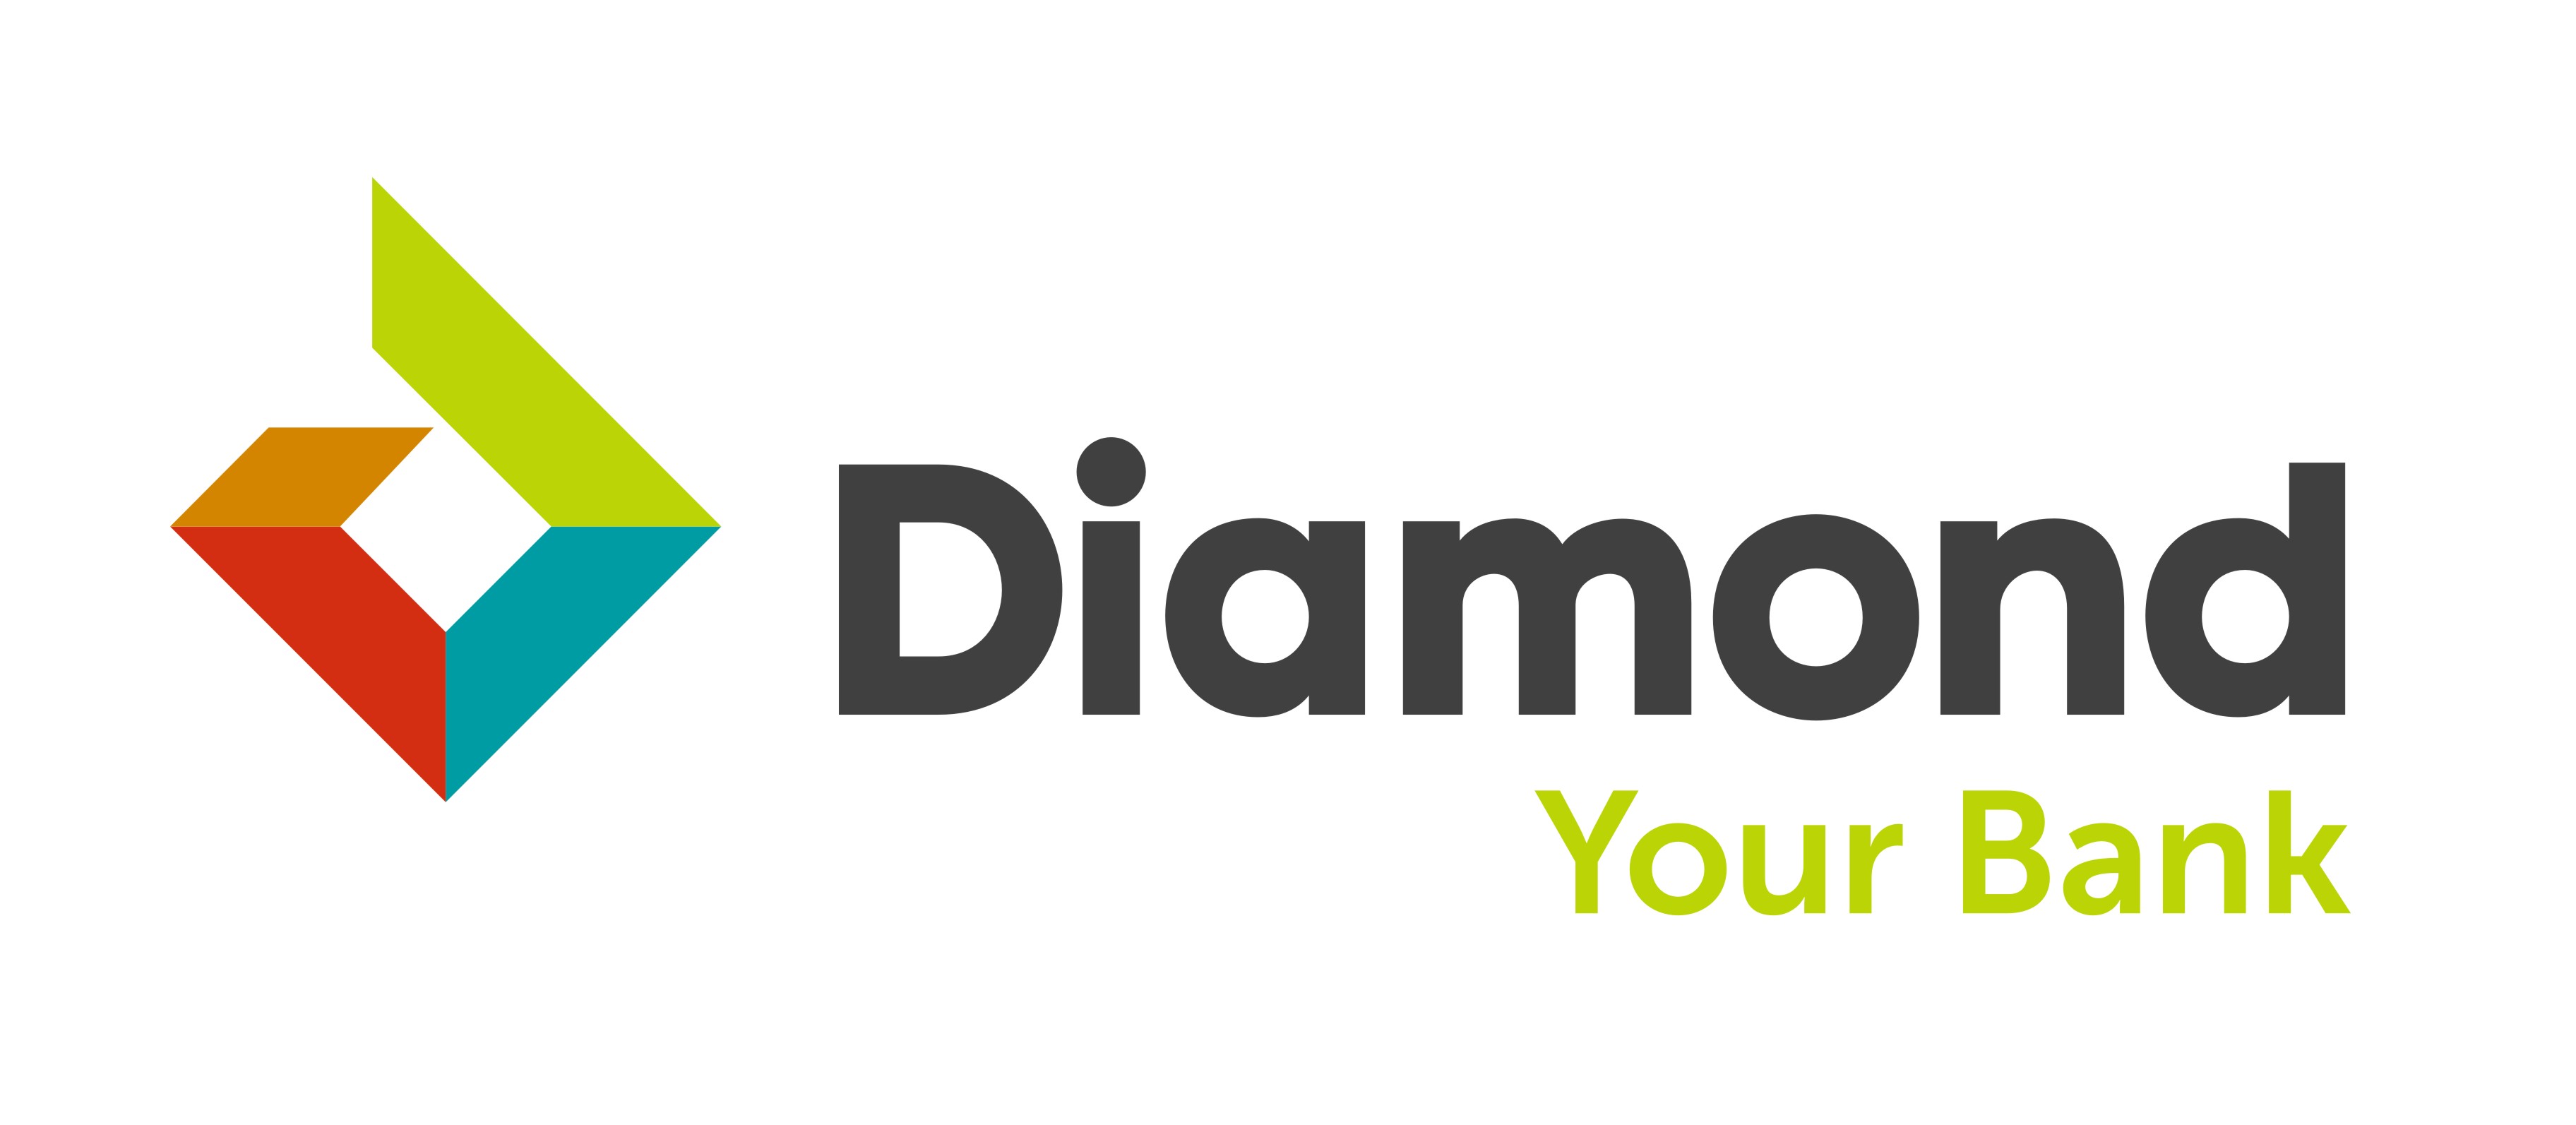 List of Diamond Bank Branches in Lagos, Nigeria